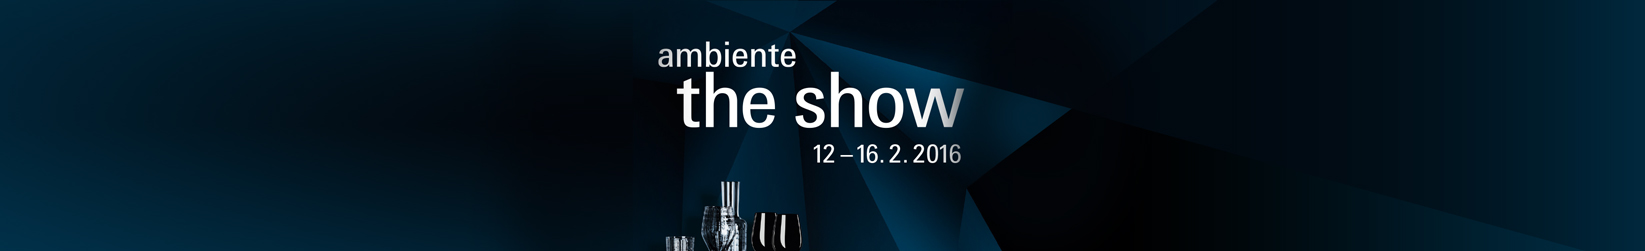 ambiente the show